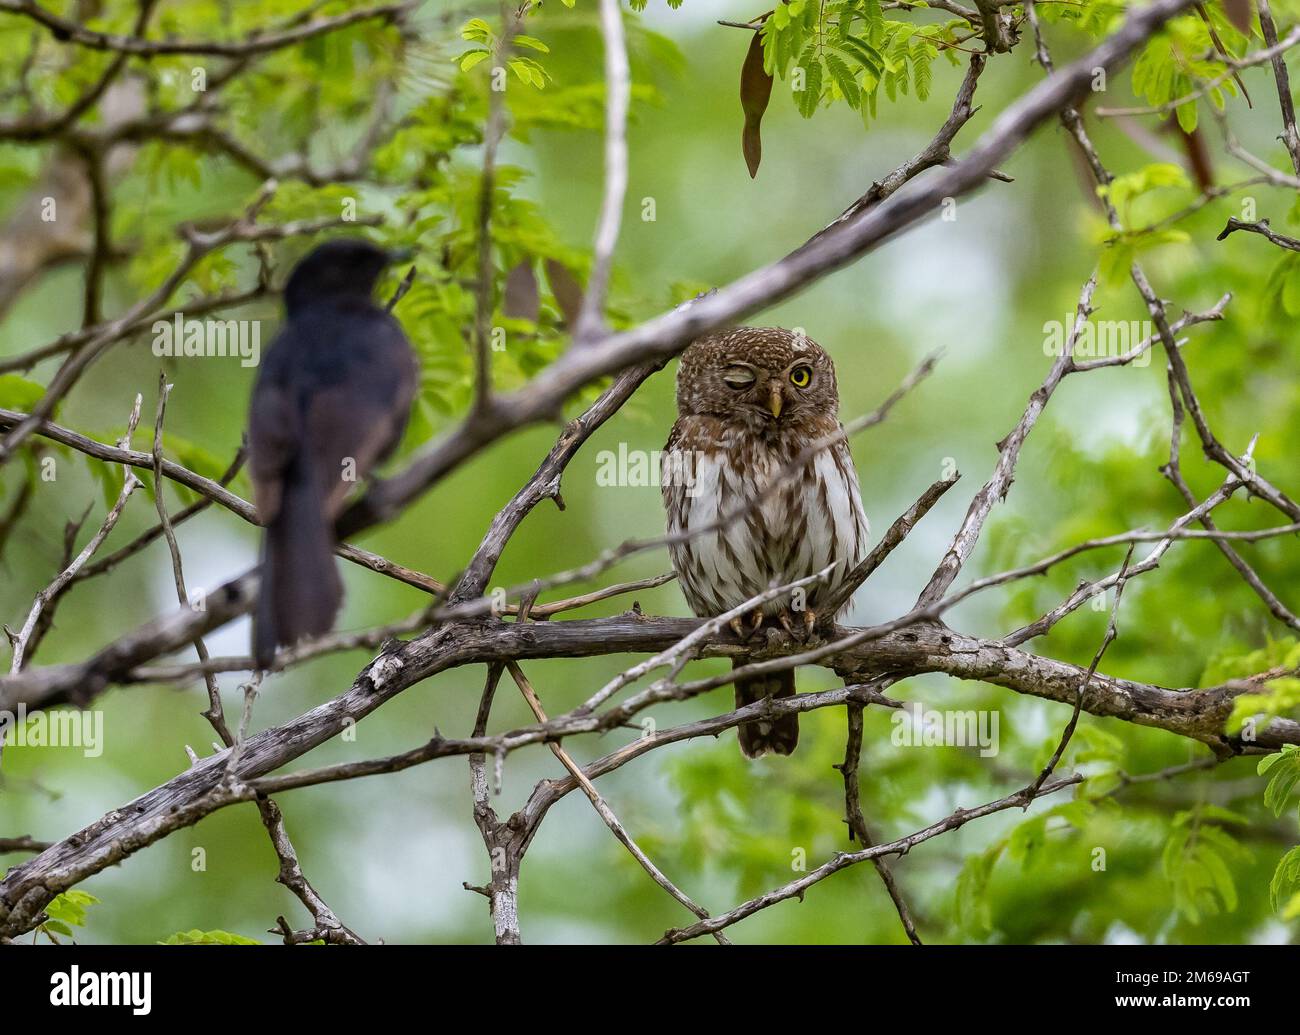 A Pearl-spotted Owlet (Glaucidium perlatum) winks at a mobbing bird. Kruger National Park, South Africa. Stock Photo